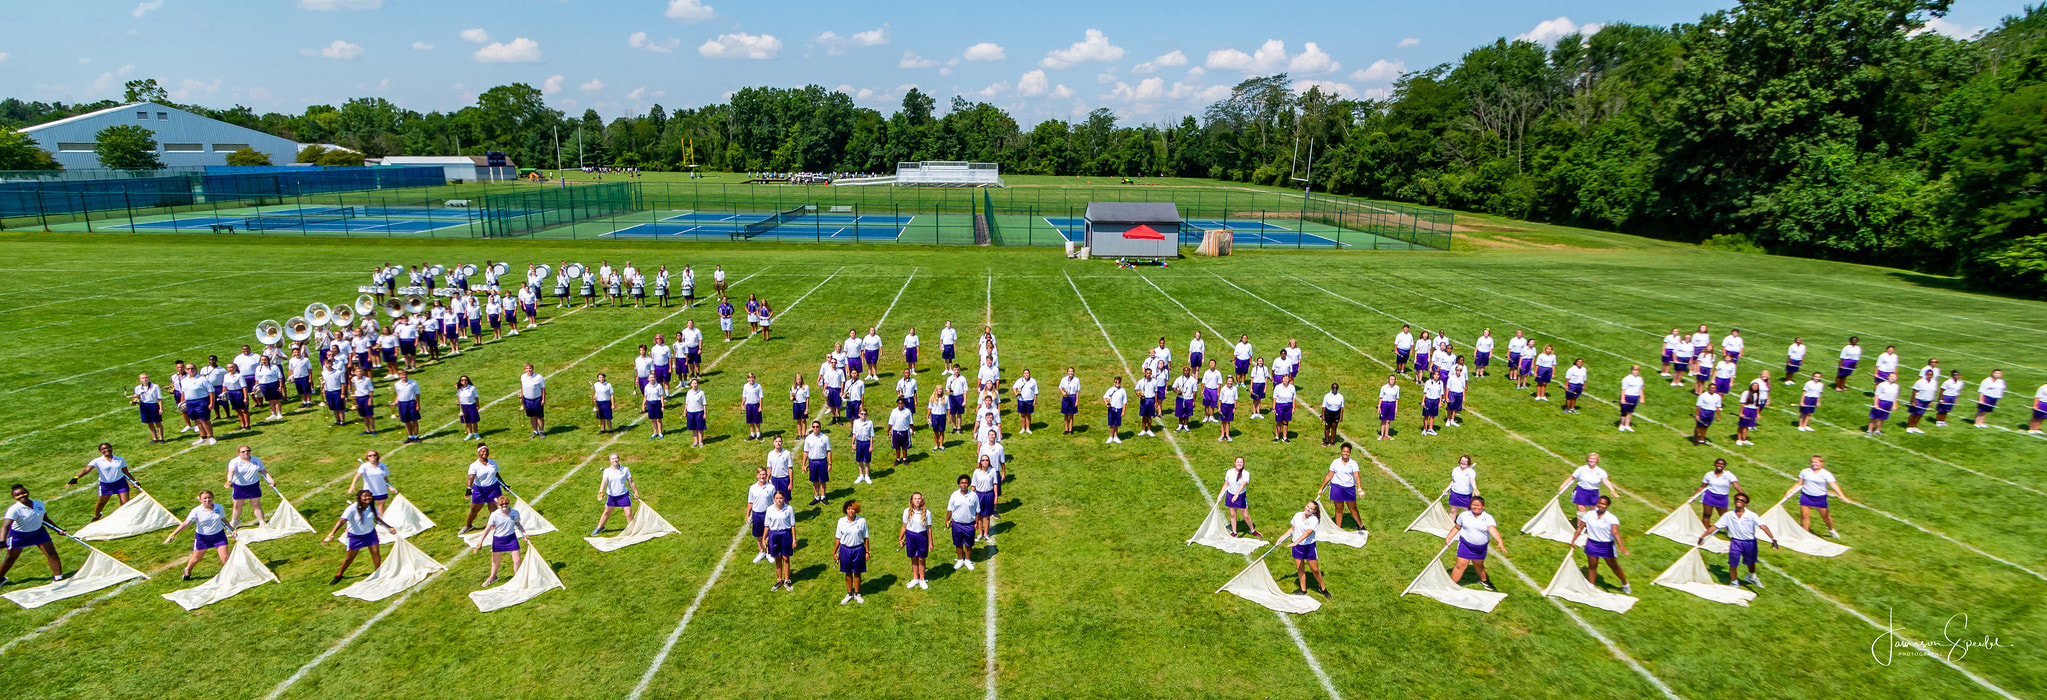 The Pickerington Central Marching Tigers on the field